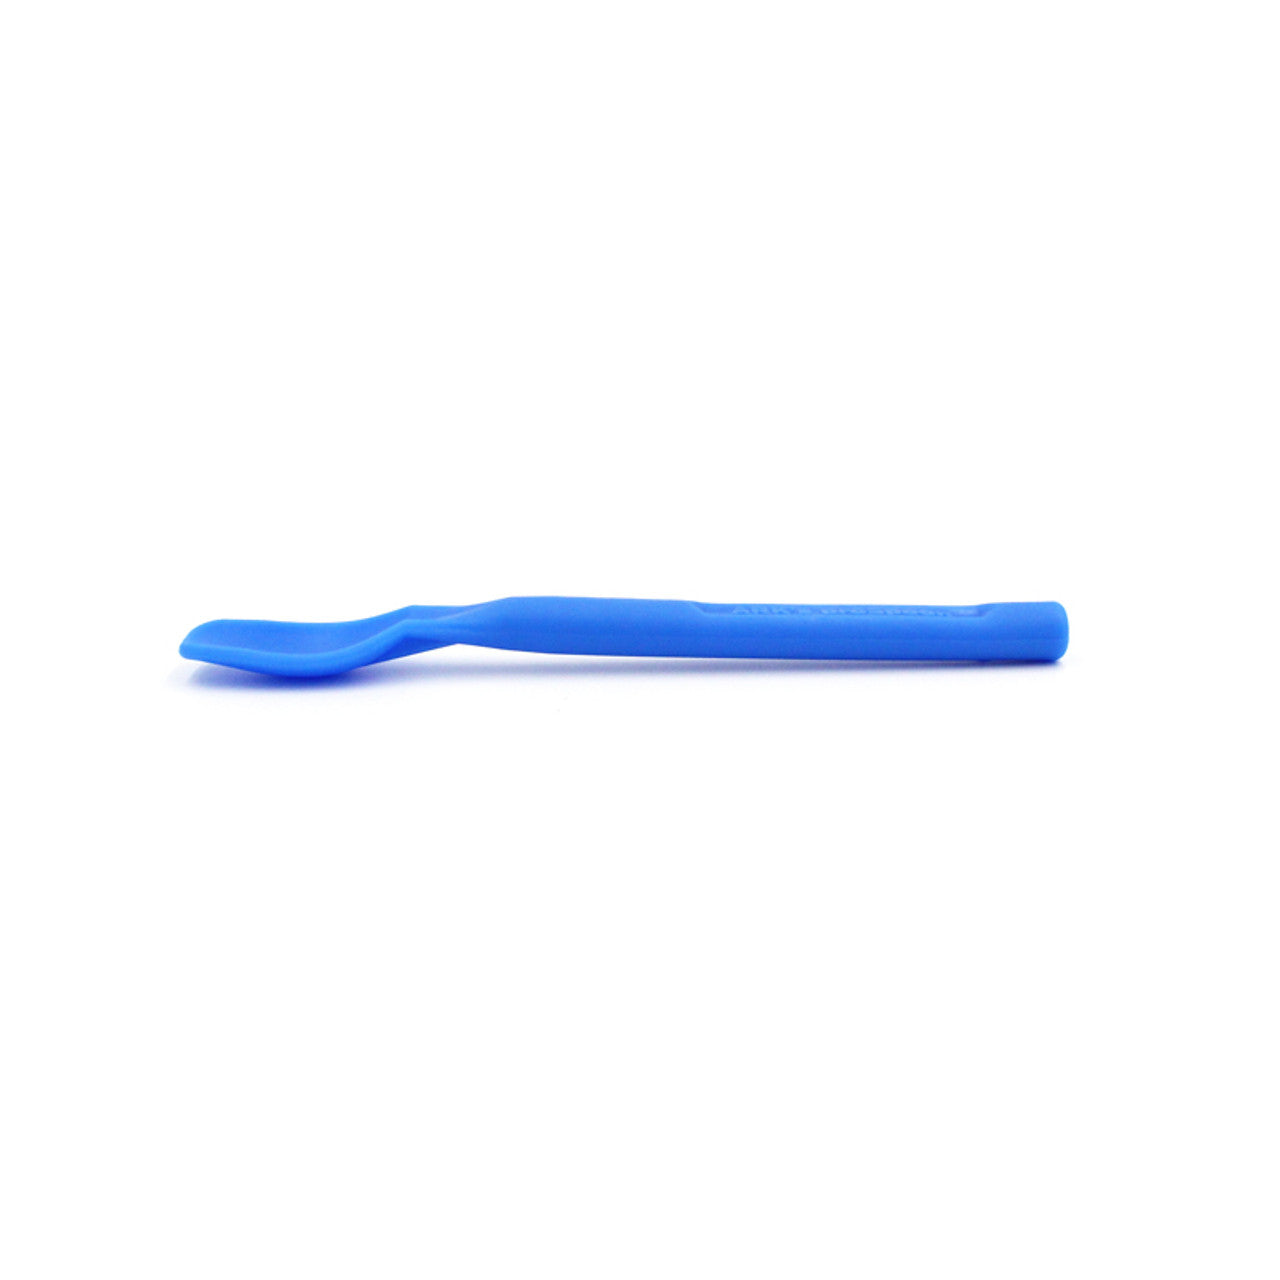 arks_prospoon_feeding_therapy_spoon_side_view.